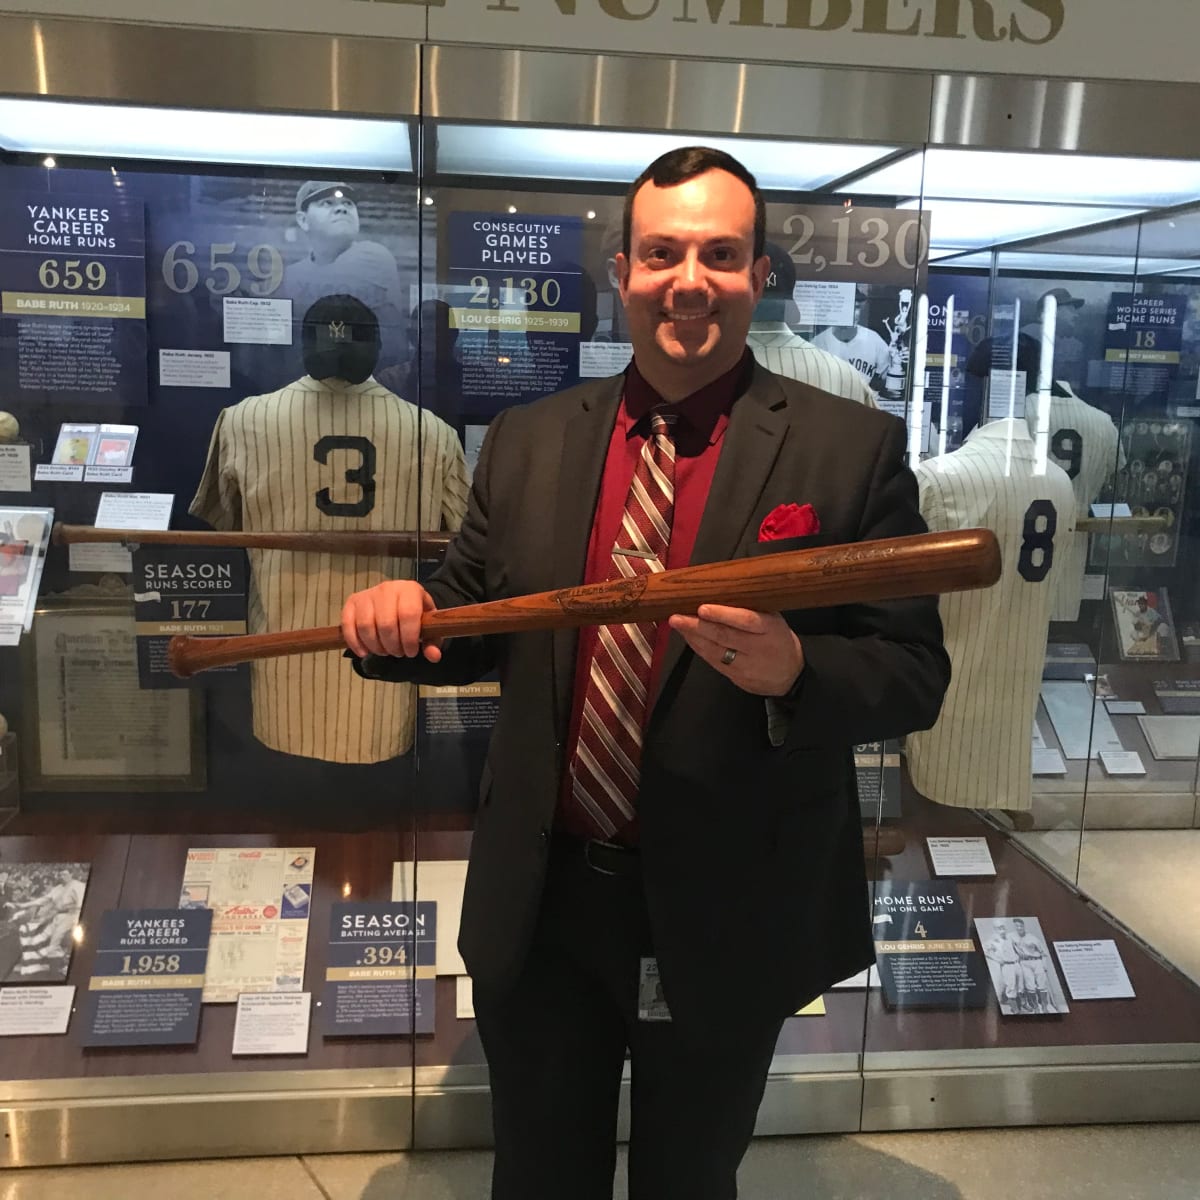 The Yankees Museum recently installed - New York Yankees